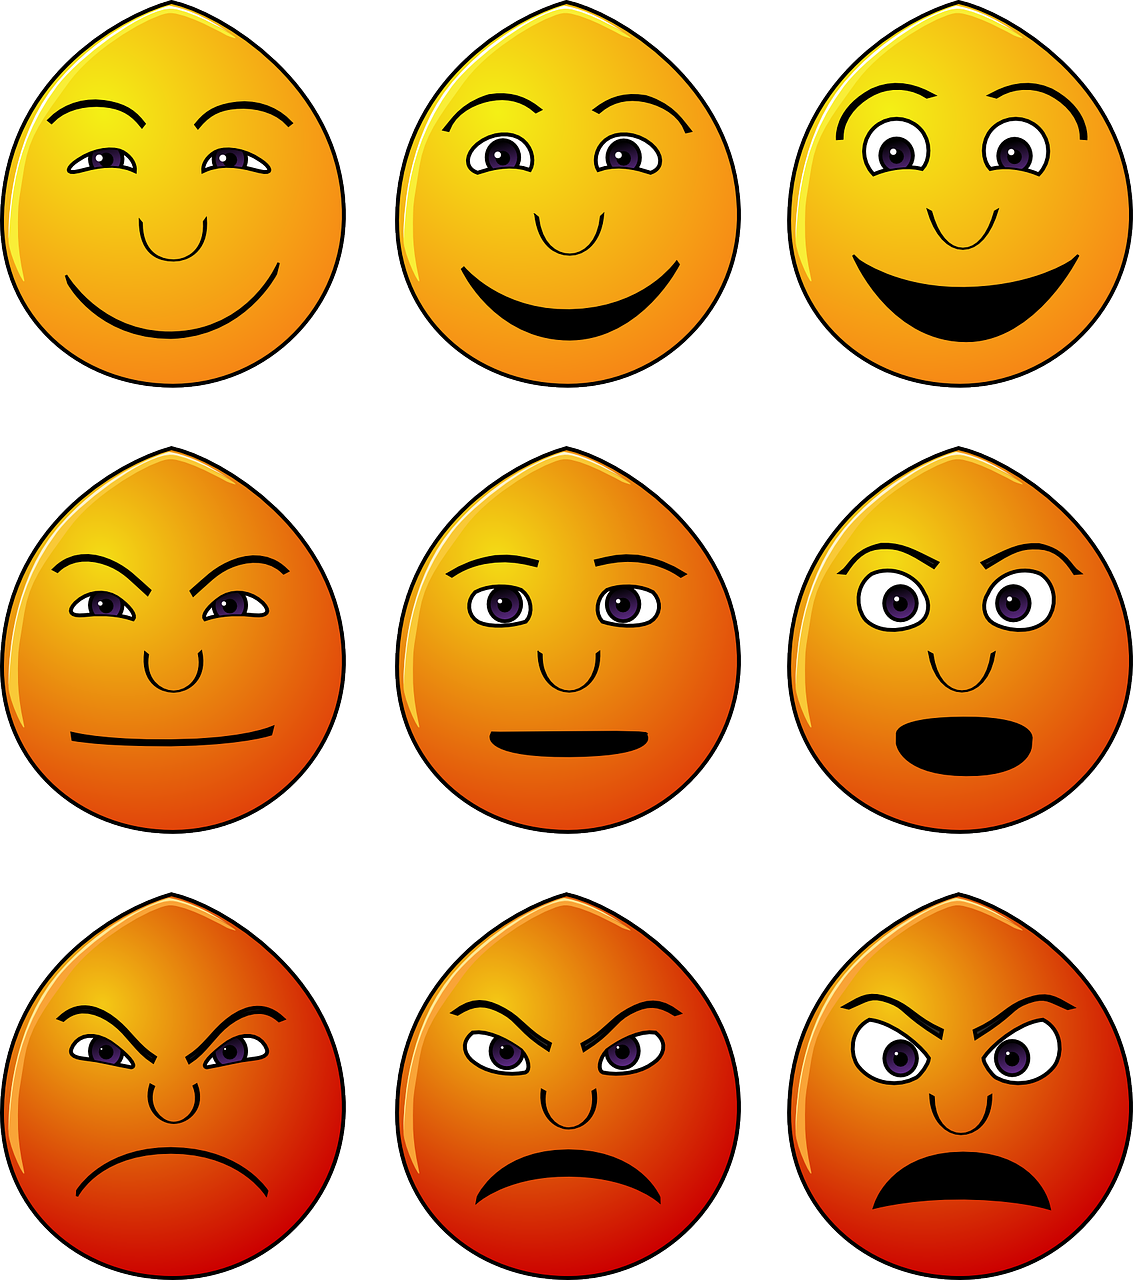 a bunch of smiley faces with different expressions, an illustration of, inspired by Heinz Anger, orange body, symmetrical face illustration, humpty dumpty in form of egg, oriental face